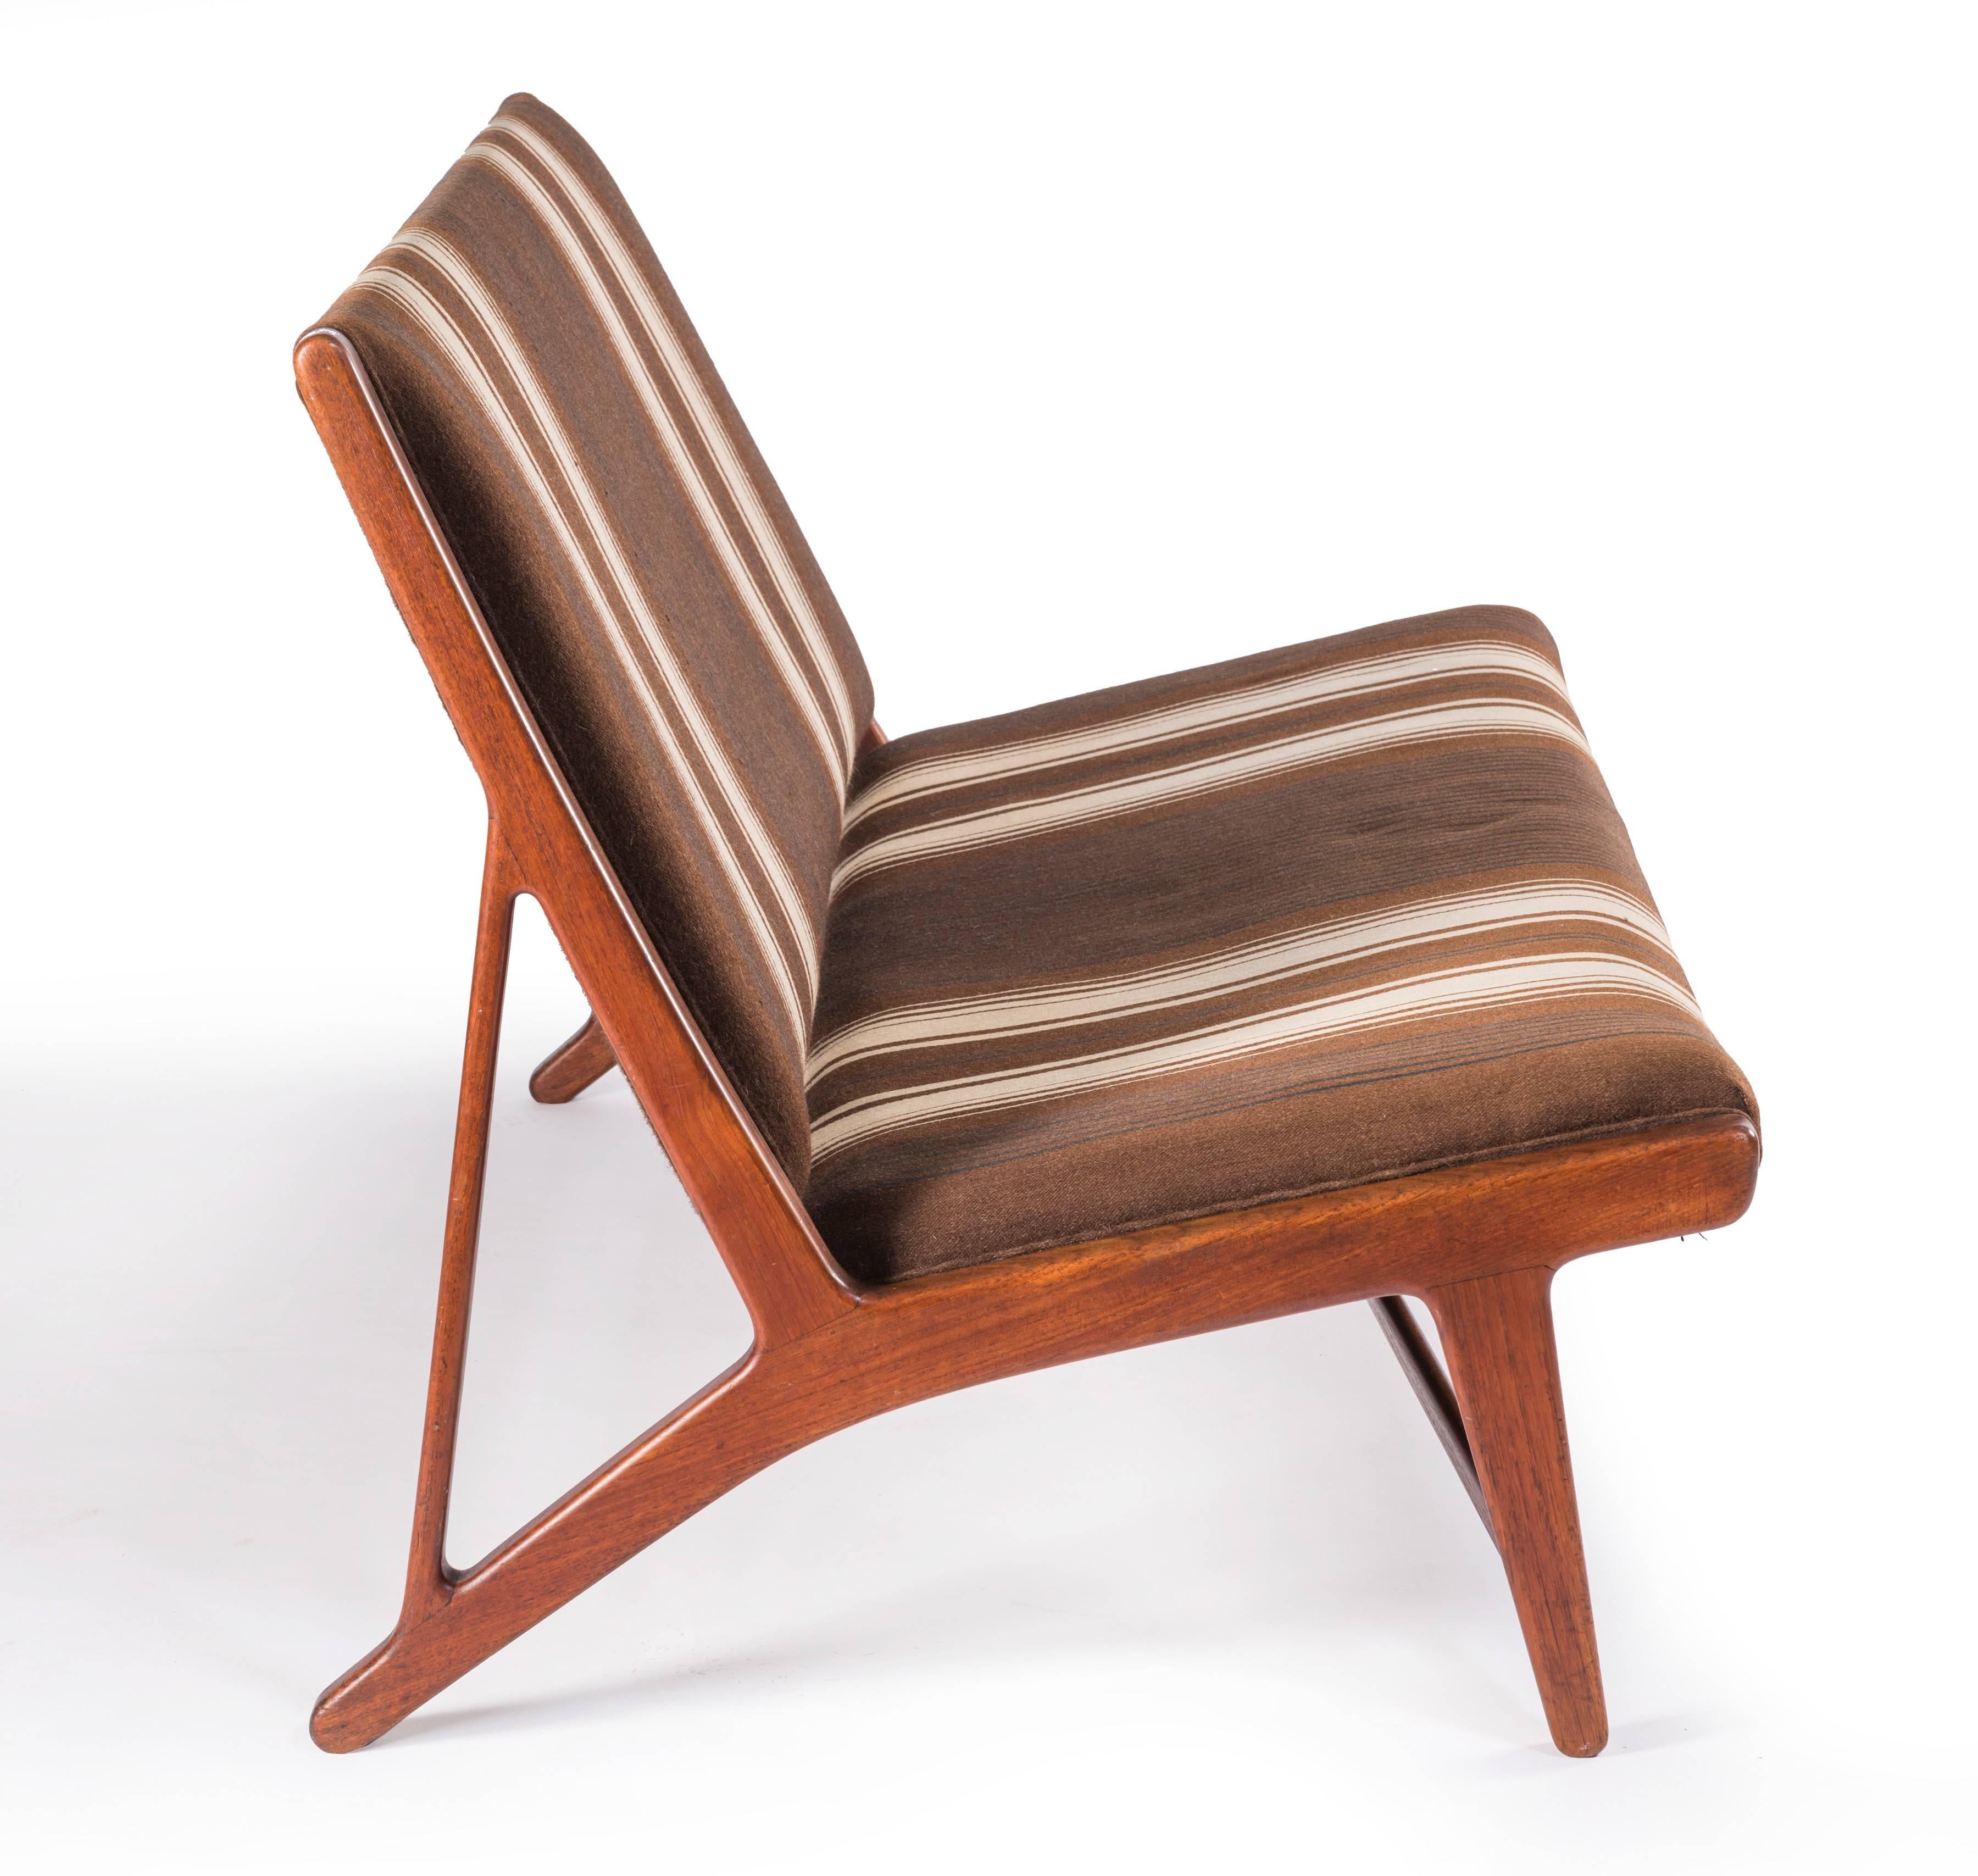 A beautiful and rare example of Model JH555, an armless settee in original wool fabric on teak frame designed by Hans Wegner in 1949 for Johannes Hansen, Denmark. Signed.